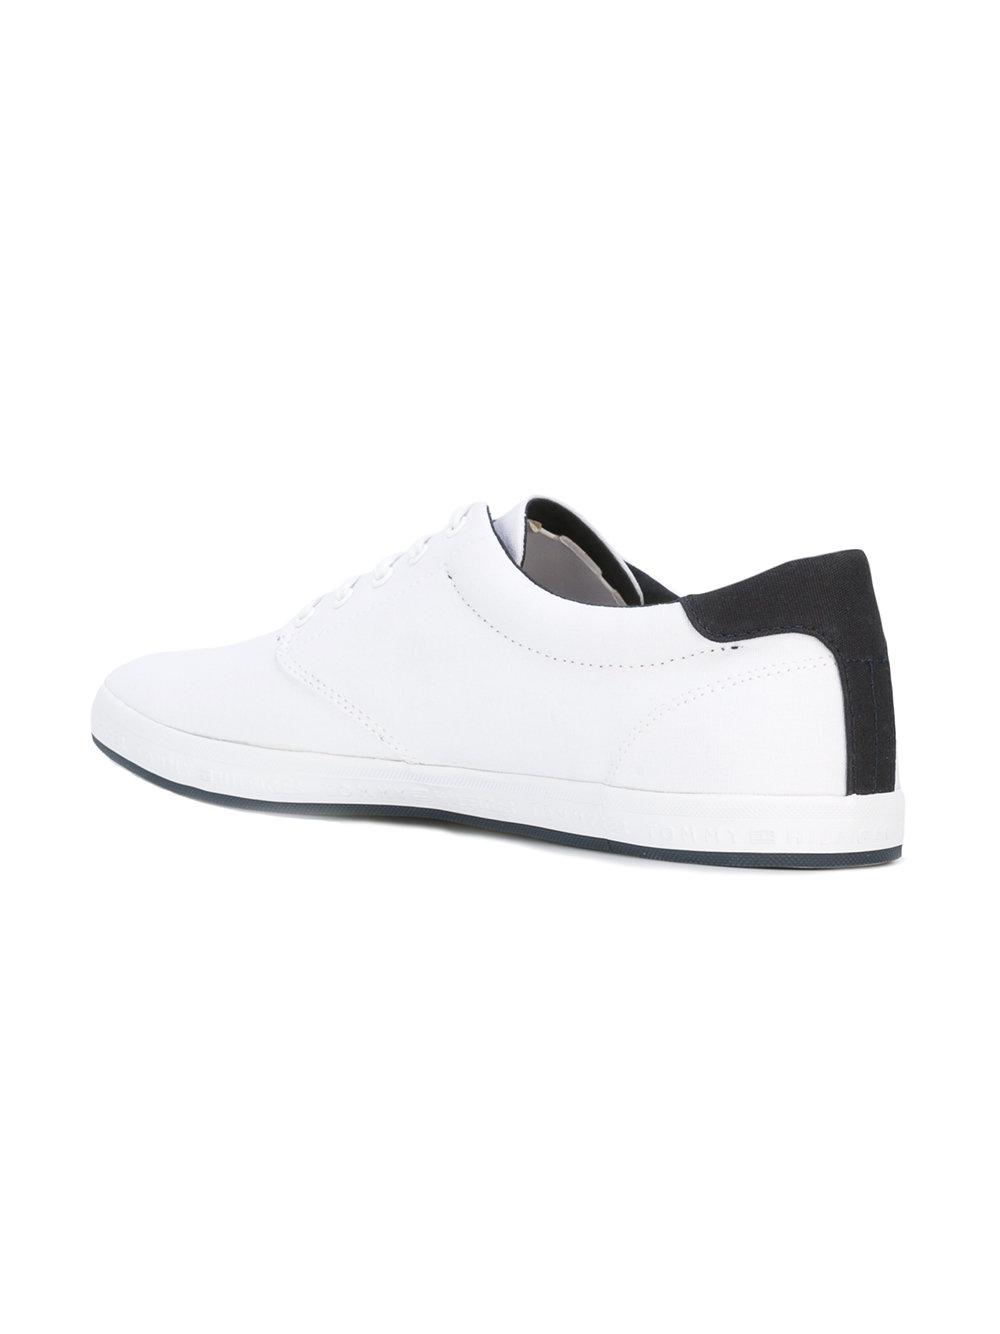 Tommy Hilfiger Rubber Classic Tennis Shoes in White for